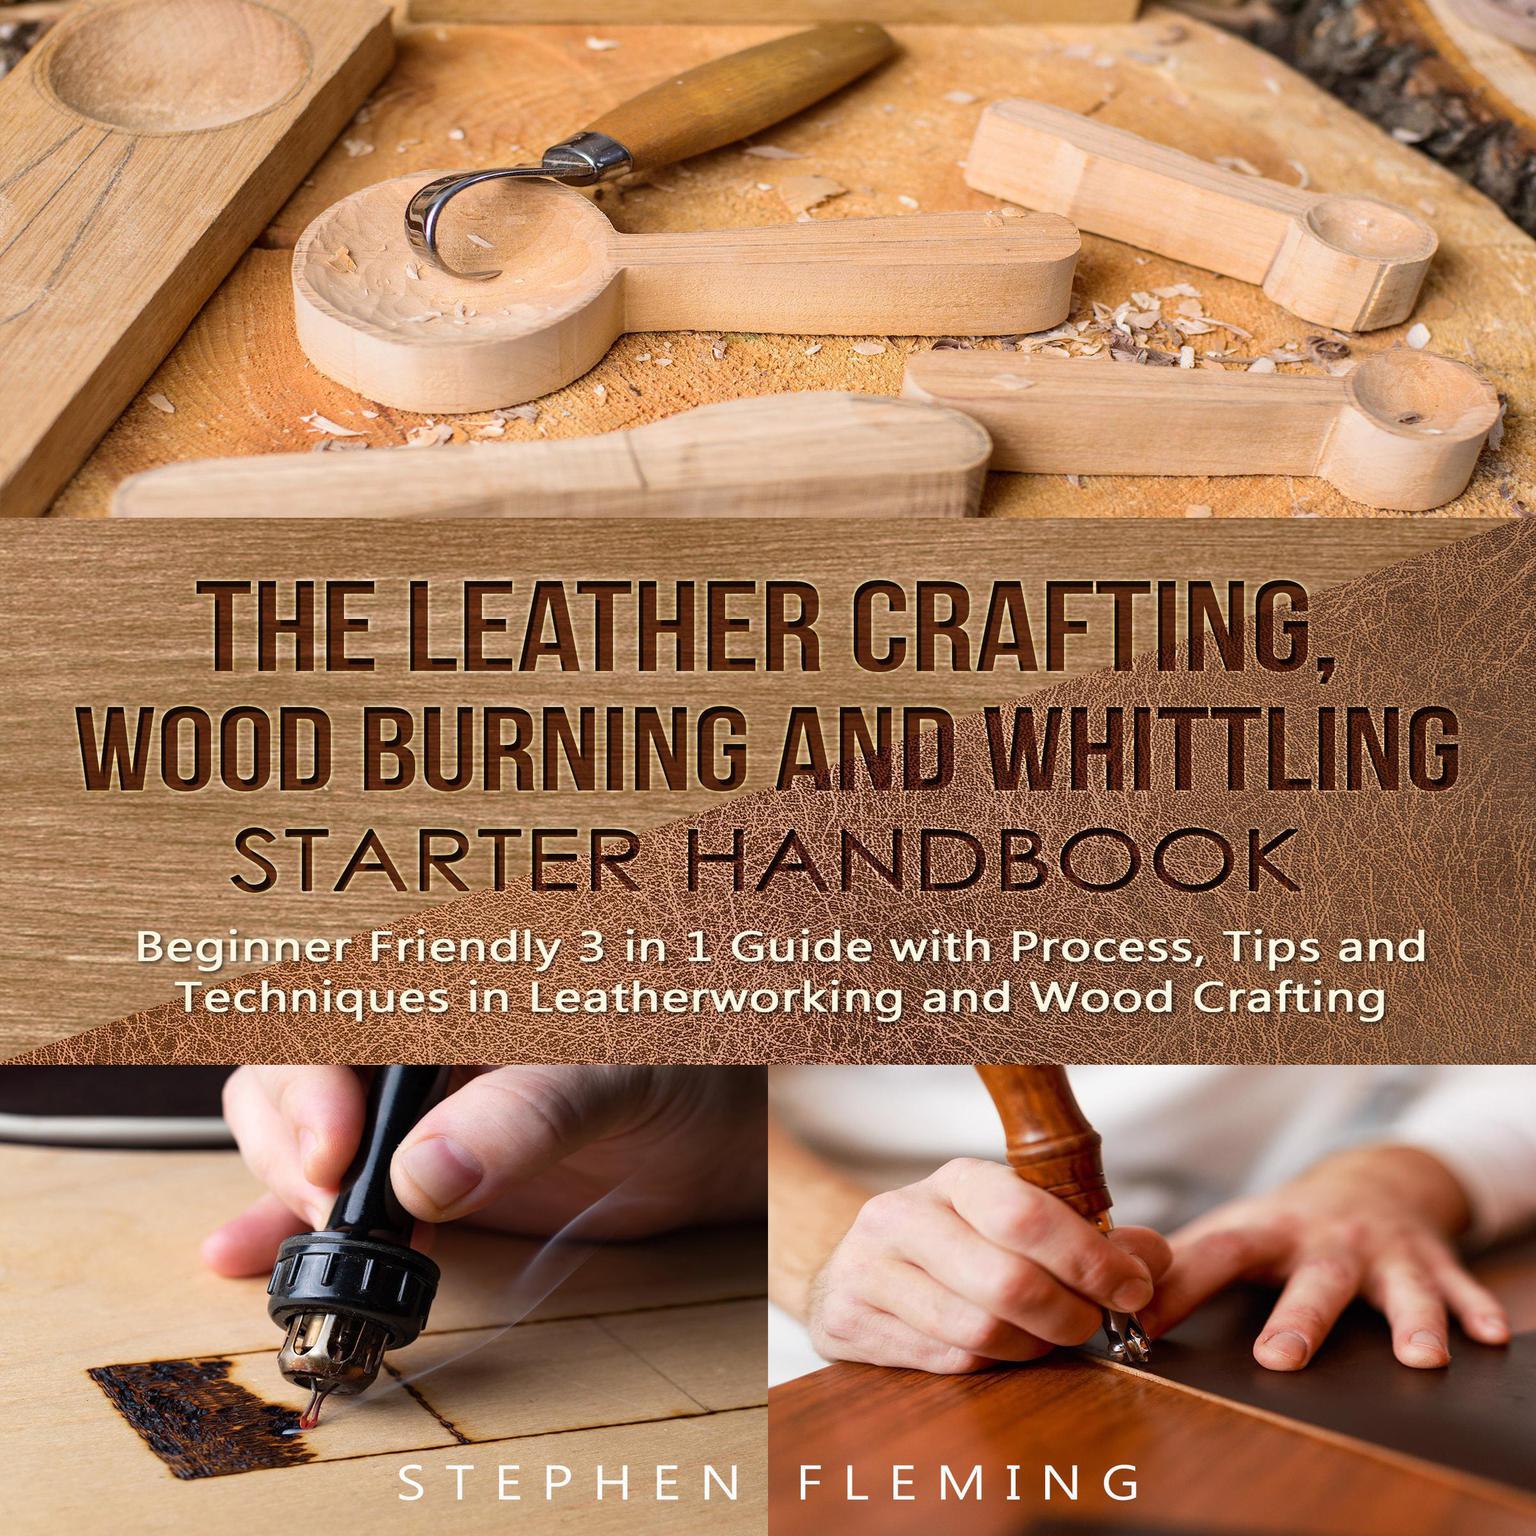 The Leather Crafting,Wood Burning and Whittling Starter Handbook: Beginner Friendly 3 in 1 Guide with Process,Tips and Techniques in Leatherworking and Wood Crafting: Beginner Friendly 3 in 1 Guide with Process,Tips and Techniques in Leatherworking and Wood Crafting Audiobook, by Stephen Fleming